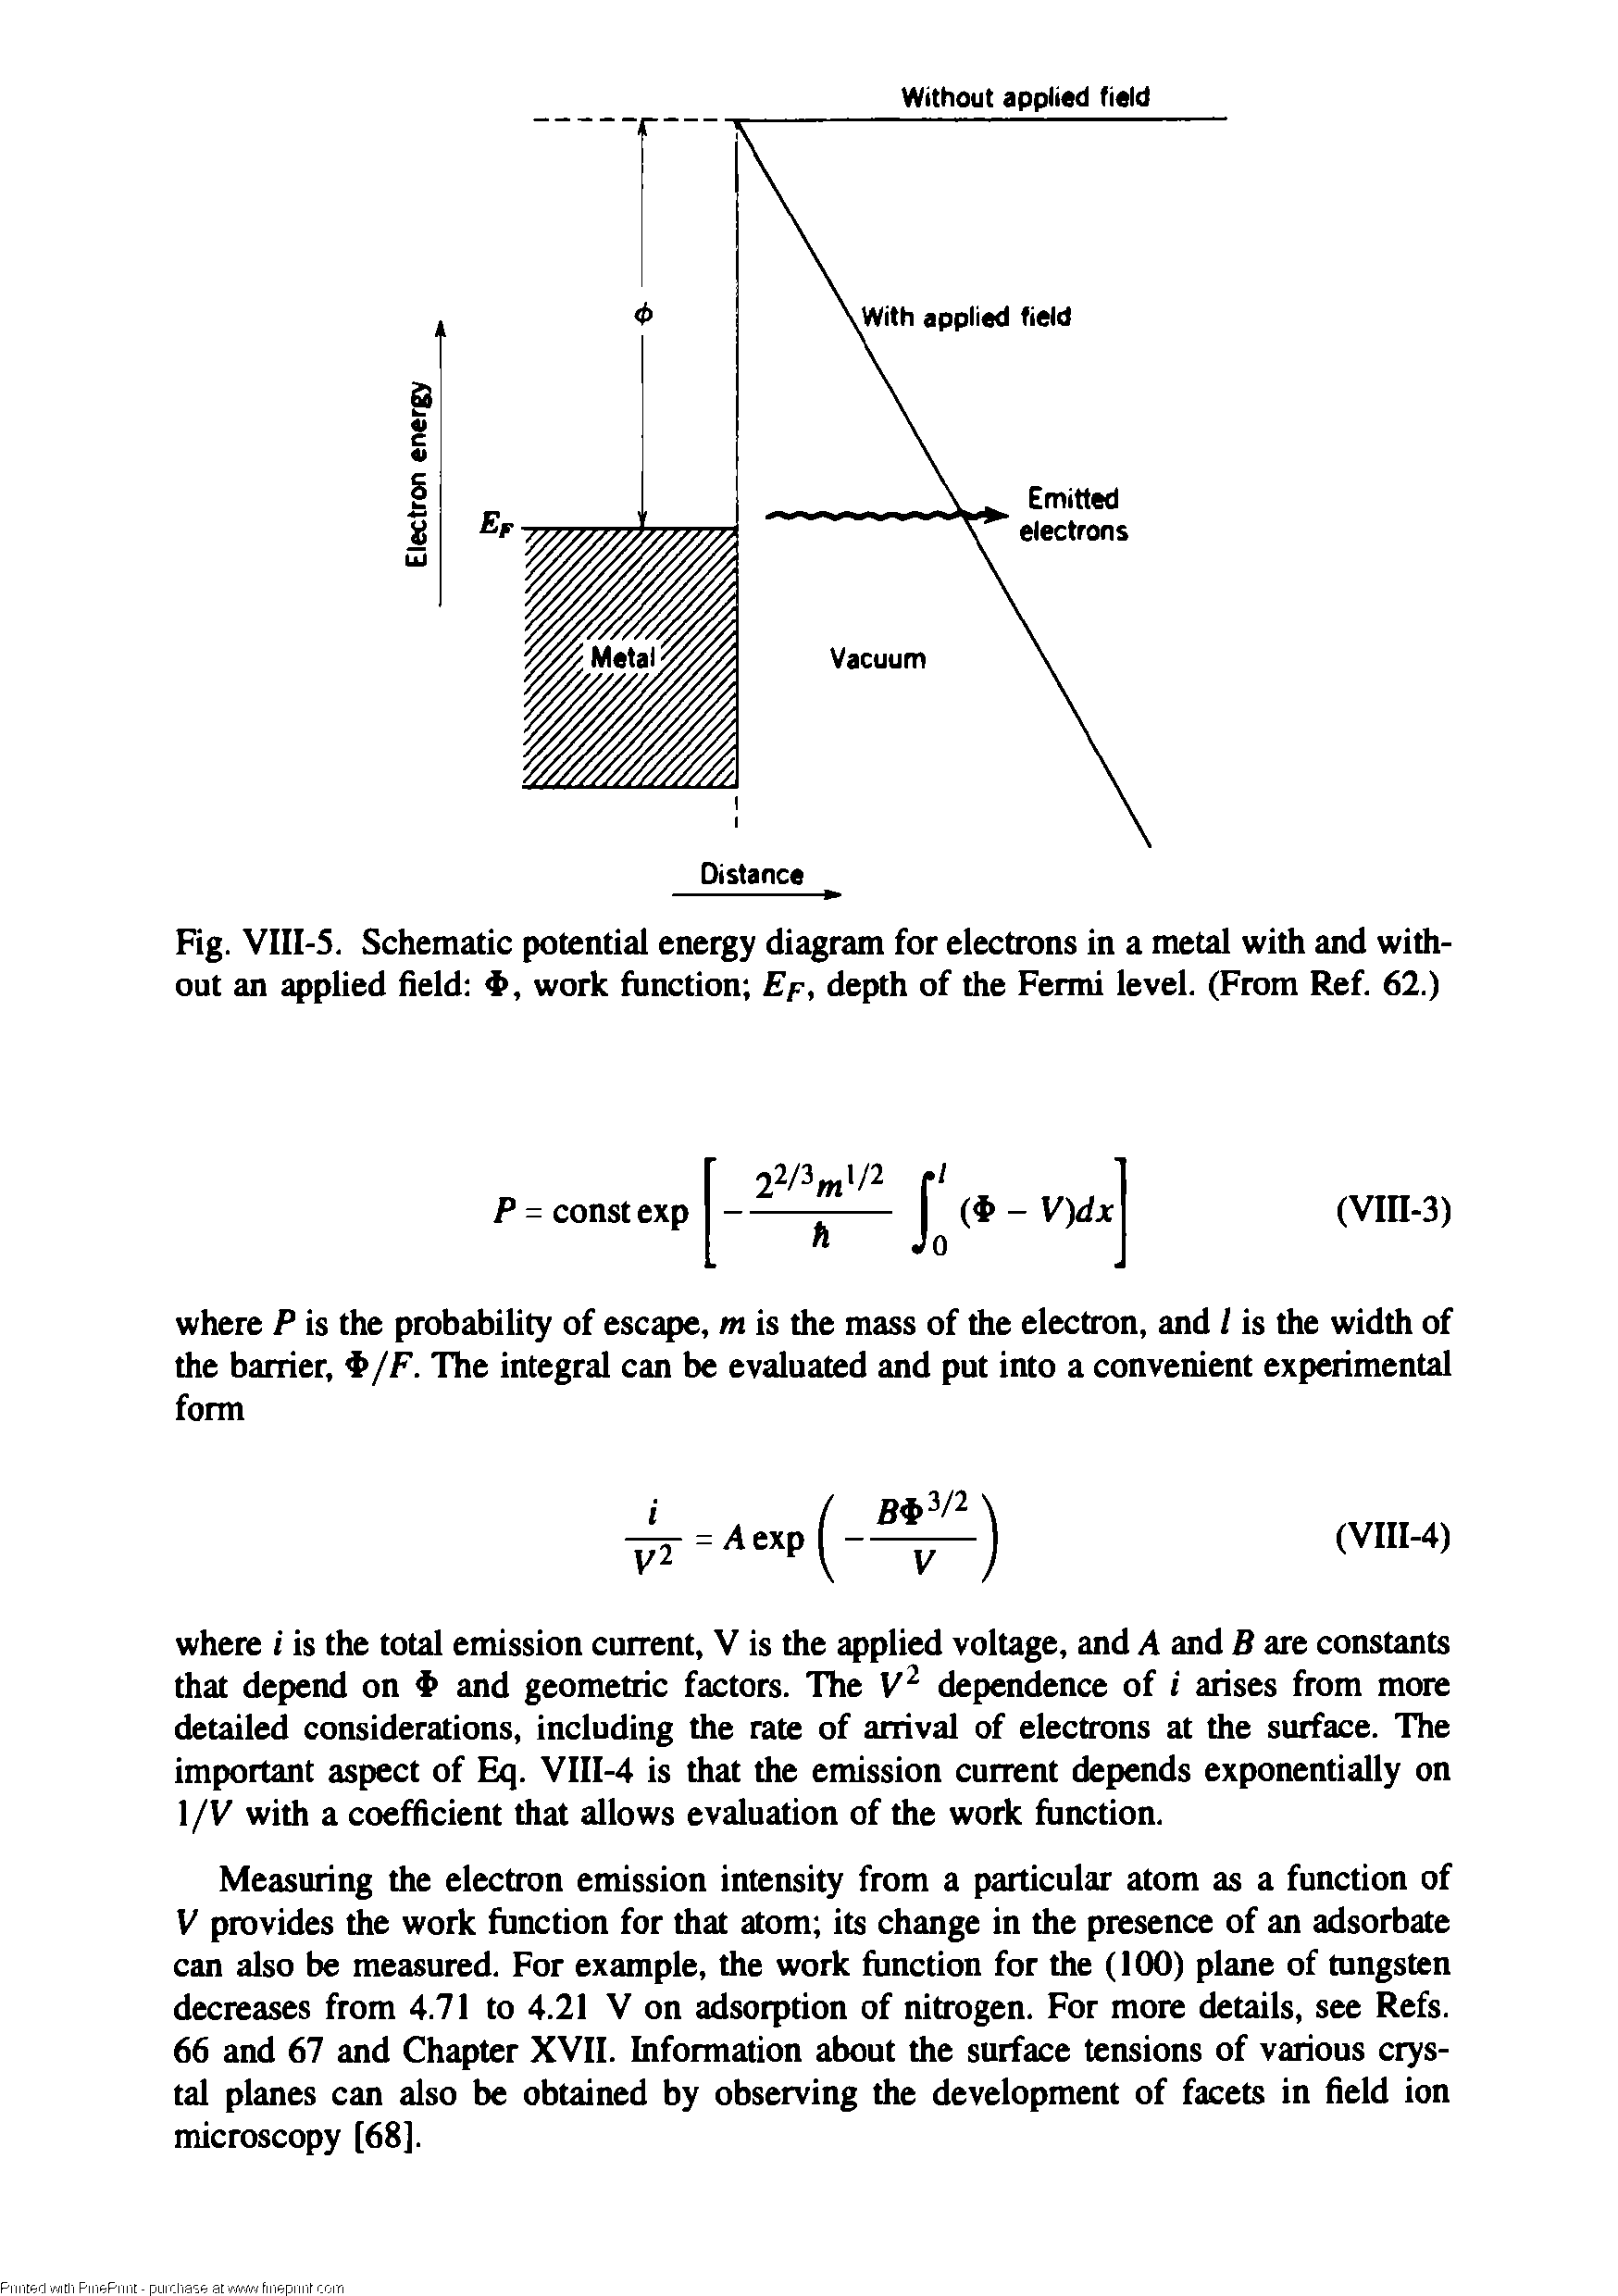 Fig. VIII-5. Schematic potential energy diagram for electrons in a metal with and without an applied field , work function Ep, depth of the Fermi level. (From Ref. 62.)...